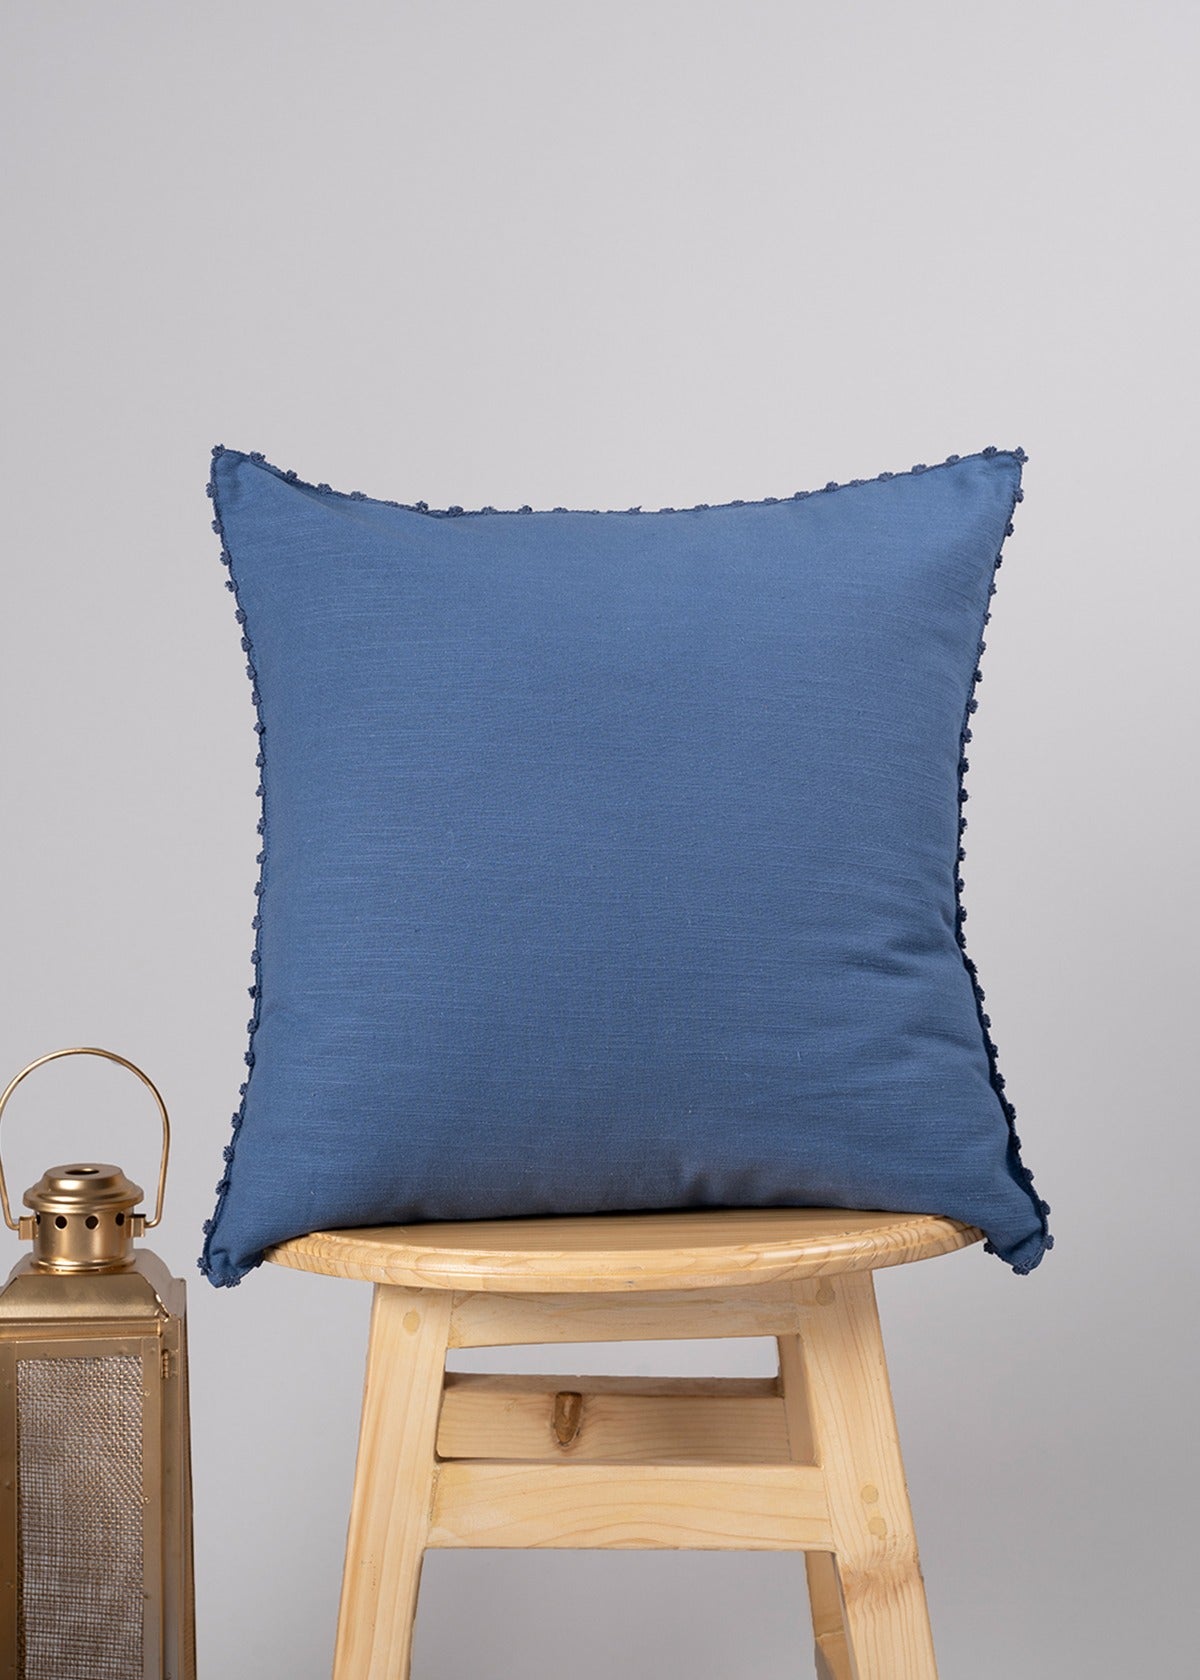 Bouquet Of Hydrangea, Royal Blue, French Farmhouse In Blues, Pampas Grass Set Of 4 Combo Cotton Cushion Cover - Blue